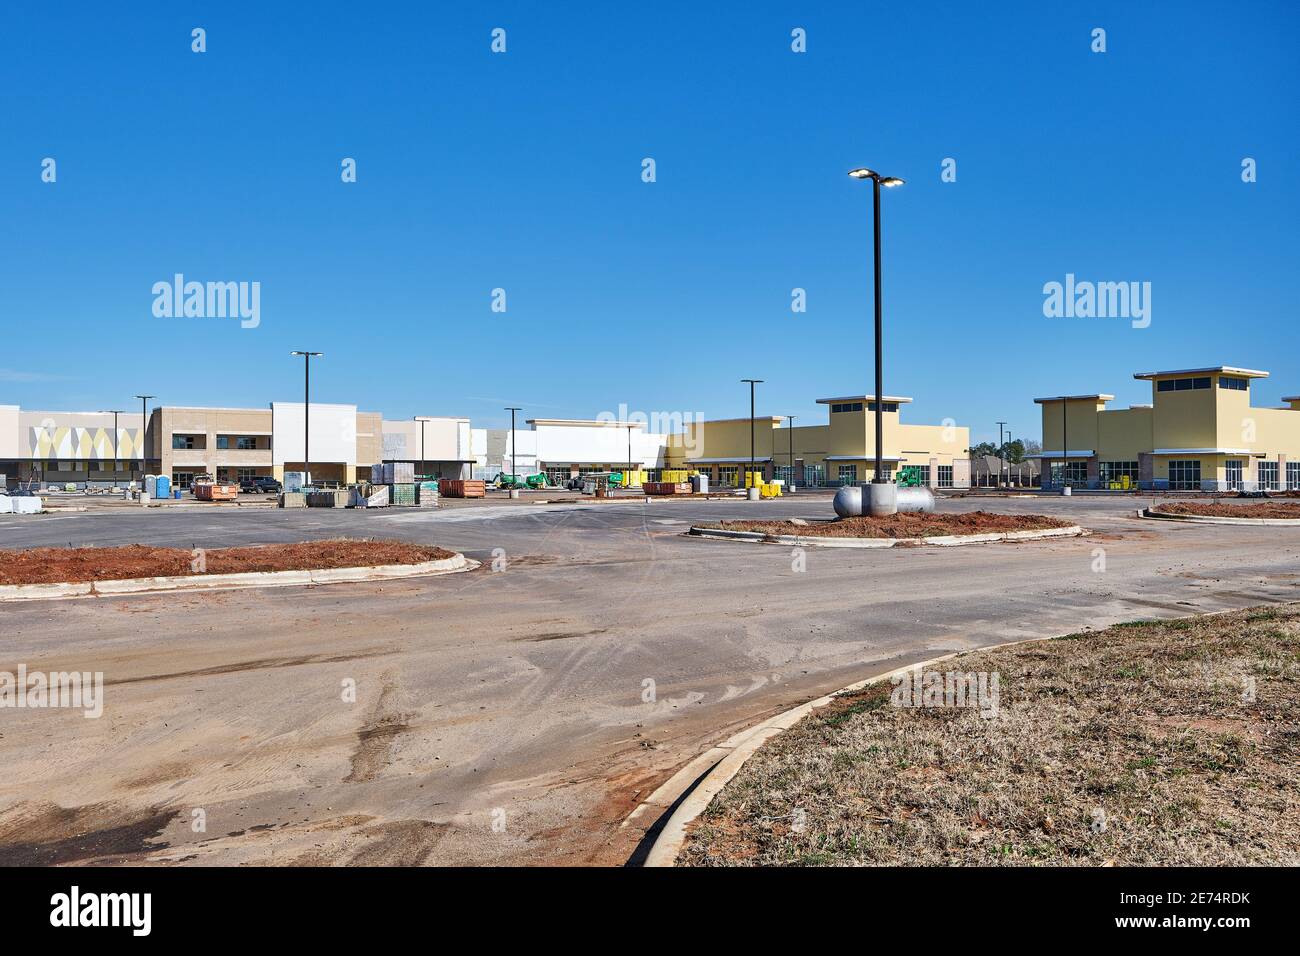 New retail shopping center under construction in Pike Road, Alabama USA. Stock Photo